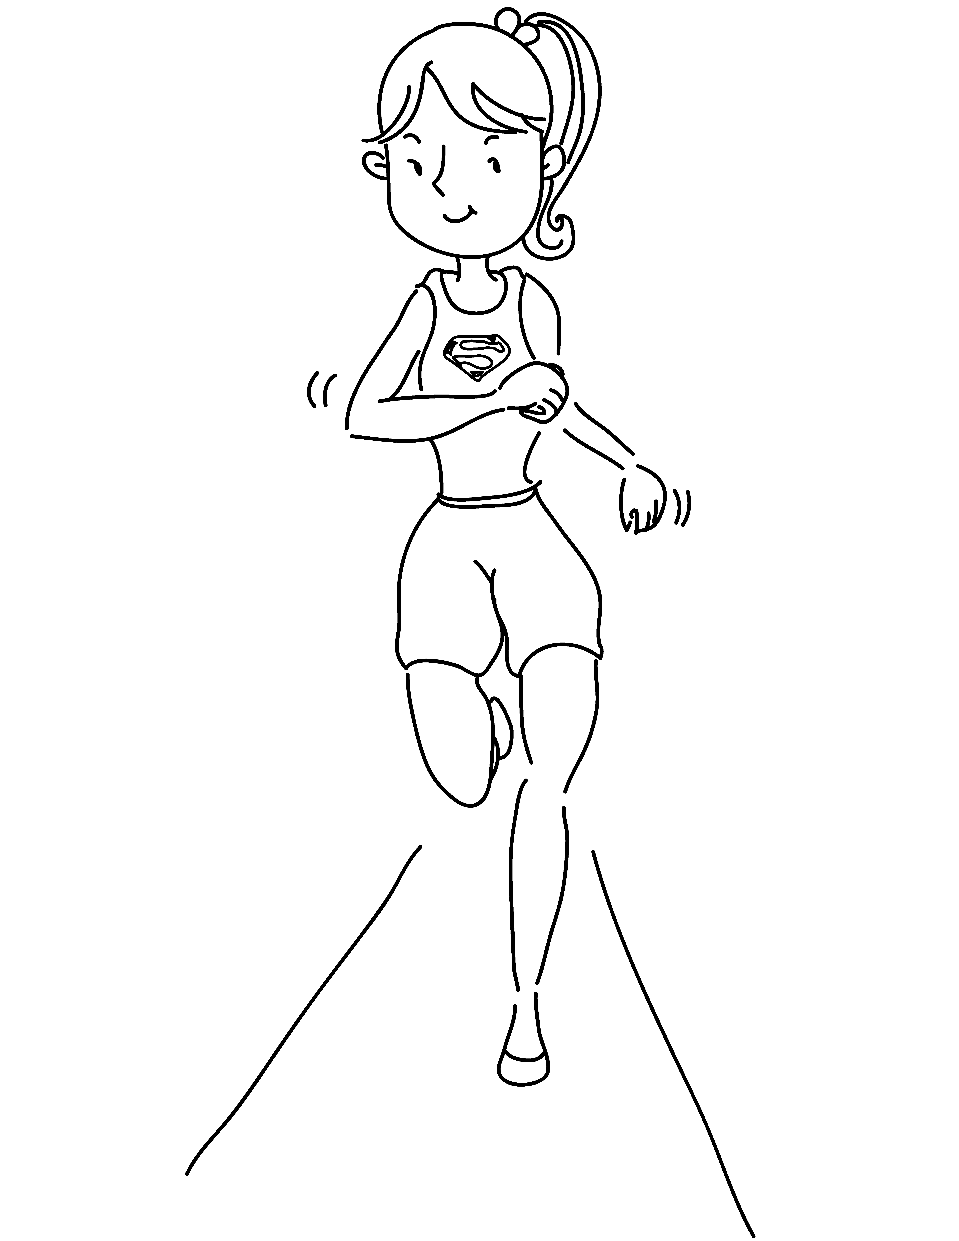 Supergirl Running Coloring Page